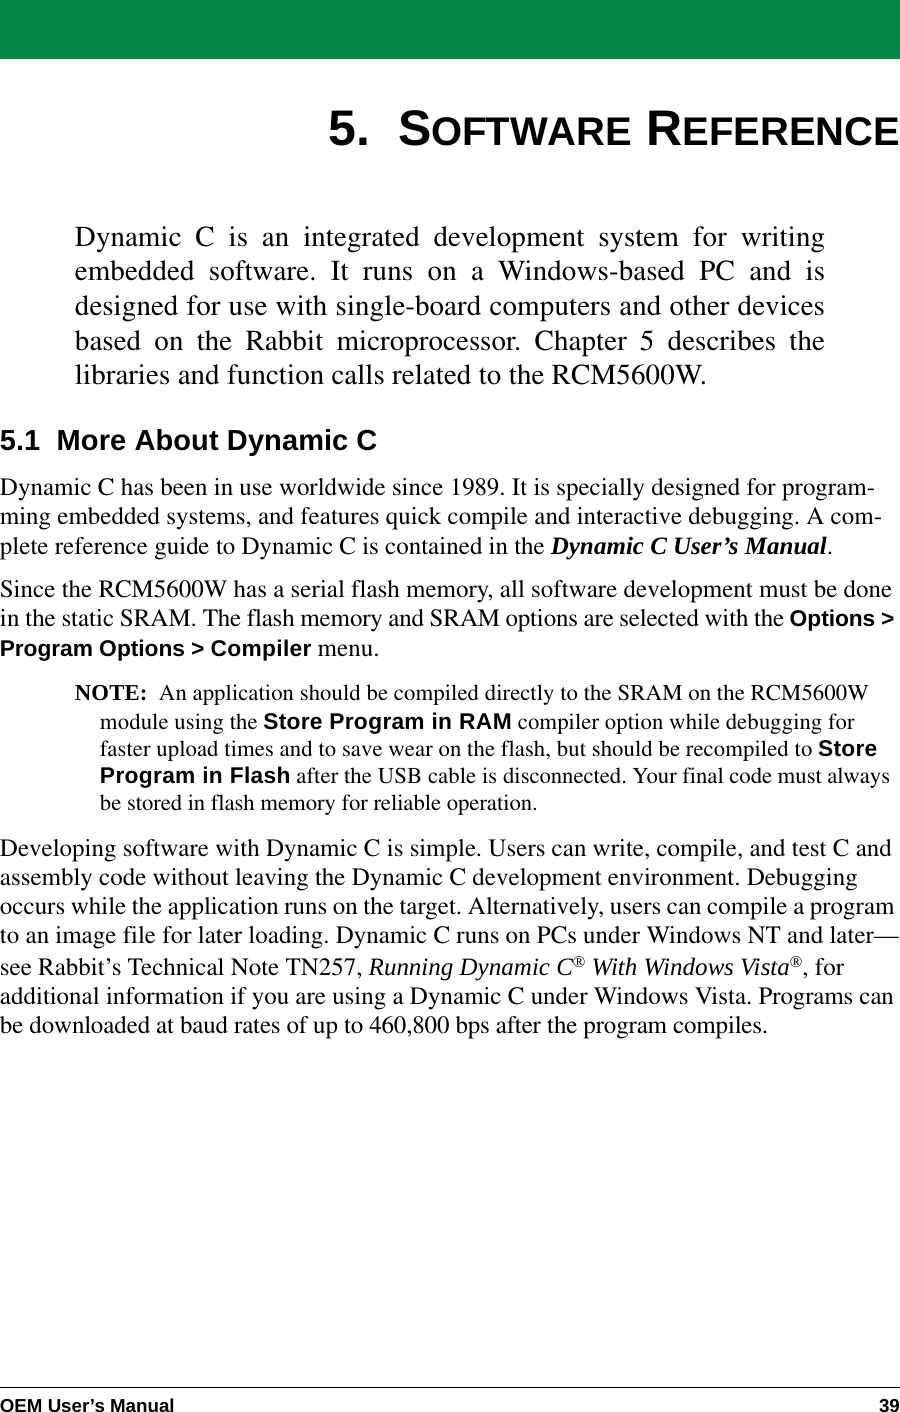 OEM User’s Manual 395.  SOFTWARE REFERENCEDynamic C is an integrated development system for writingembedded software. It runs on a Windows-based PC and isdesigned for use with single-board computers and other devicesbased on the Rabbit microprocessor. Chapter 5 describes thelibraries and function calls related to the RCM5600W.5.1  More About Dynamic CDynamic C has been in use worldwide since 1989. It is specially designed for program-ming embedded systems, and features quick compile and interactive debugging. A com-plete reference guide to Dynamic C is contained in the Dynamic C User’s Manual.Since the RCM5600W has a serial flash memory, all software development must be done in the static SRAM. The flash memory and SRAM options are selected with the Options &gt; Program Options &gt; Compiler menu.NOTE: An application should be compiled directly to the SRAM on the RCM5600W module using the Store Program in RAM compiler option while debugging for faster upload times and to save wear on the flash, but should be recompiled to Store Program in Flash after the USB cable is disconnected. Your final code must always be stored in flash memory for reliable operation.Developing software with Dynamic C is simple. Users can write, compile, and test C and assembly code without leaving the Dynamic C development environment. Debugging occurs while the application runs on the target. Alternatively, users can compile a program to an image file for later loading. Dynamic C runs on PCs under Windows NT and later—see Rabbit’s Technical Note TN257, Running Dynamic C® With Windows Vista®, for additional information if you are using a Dynamic C under Windows Vista. Programs can be downloaded at baud rates of up to 460,800 bps after the program compiles.